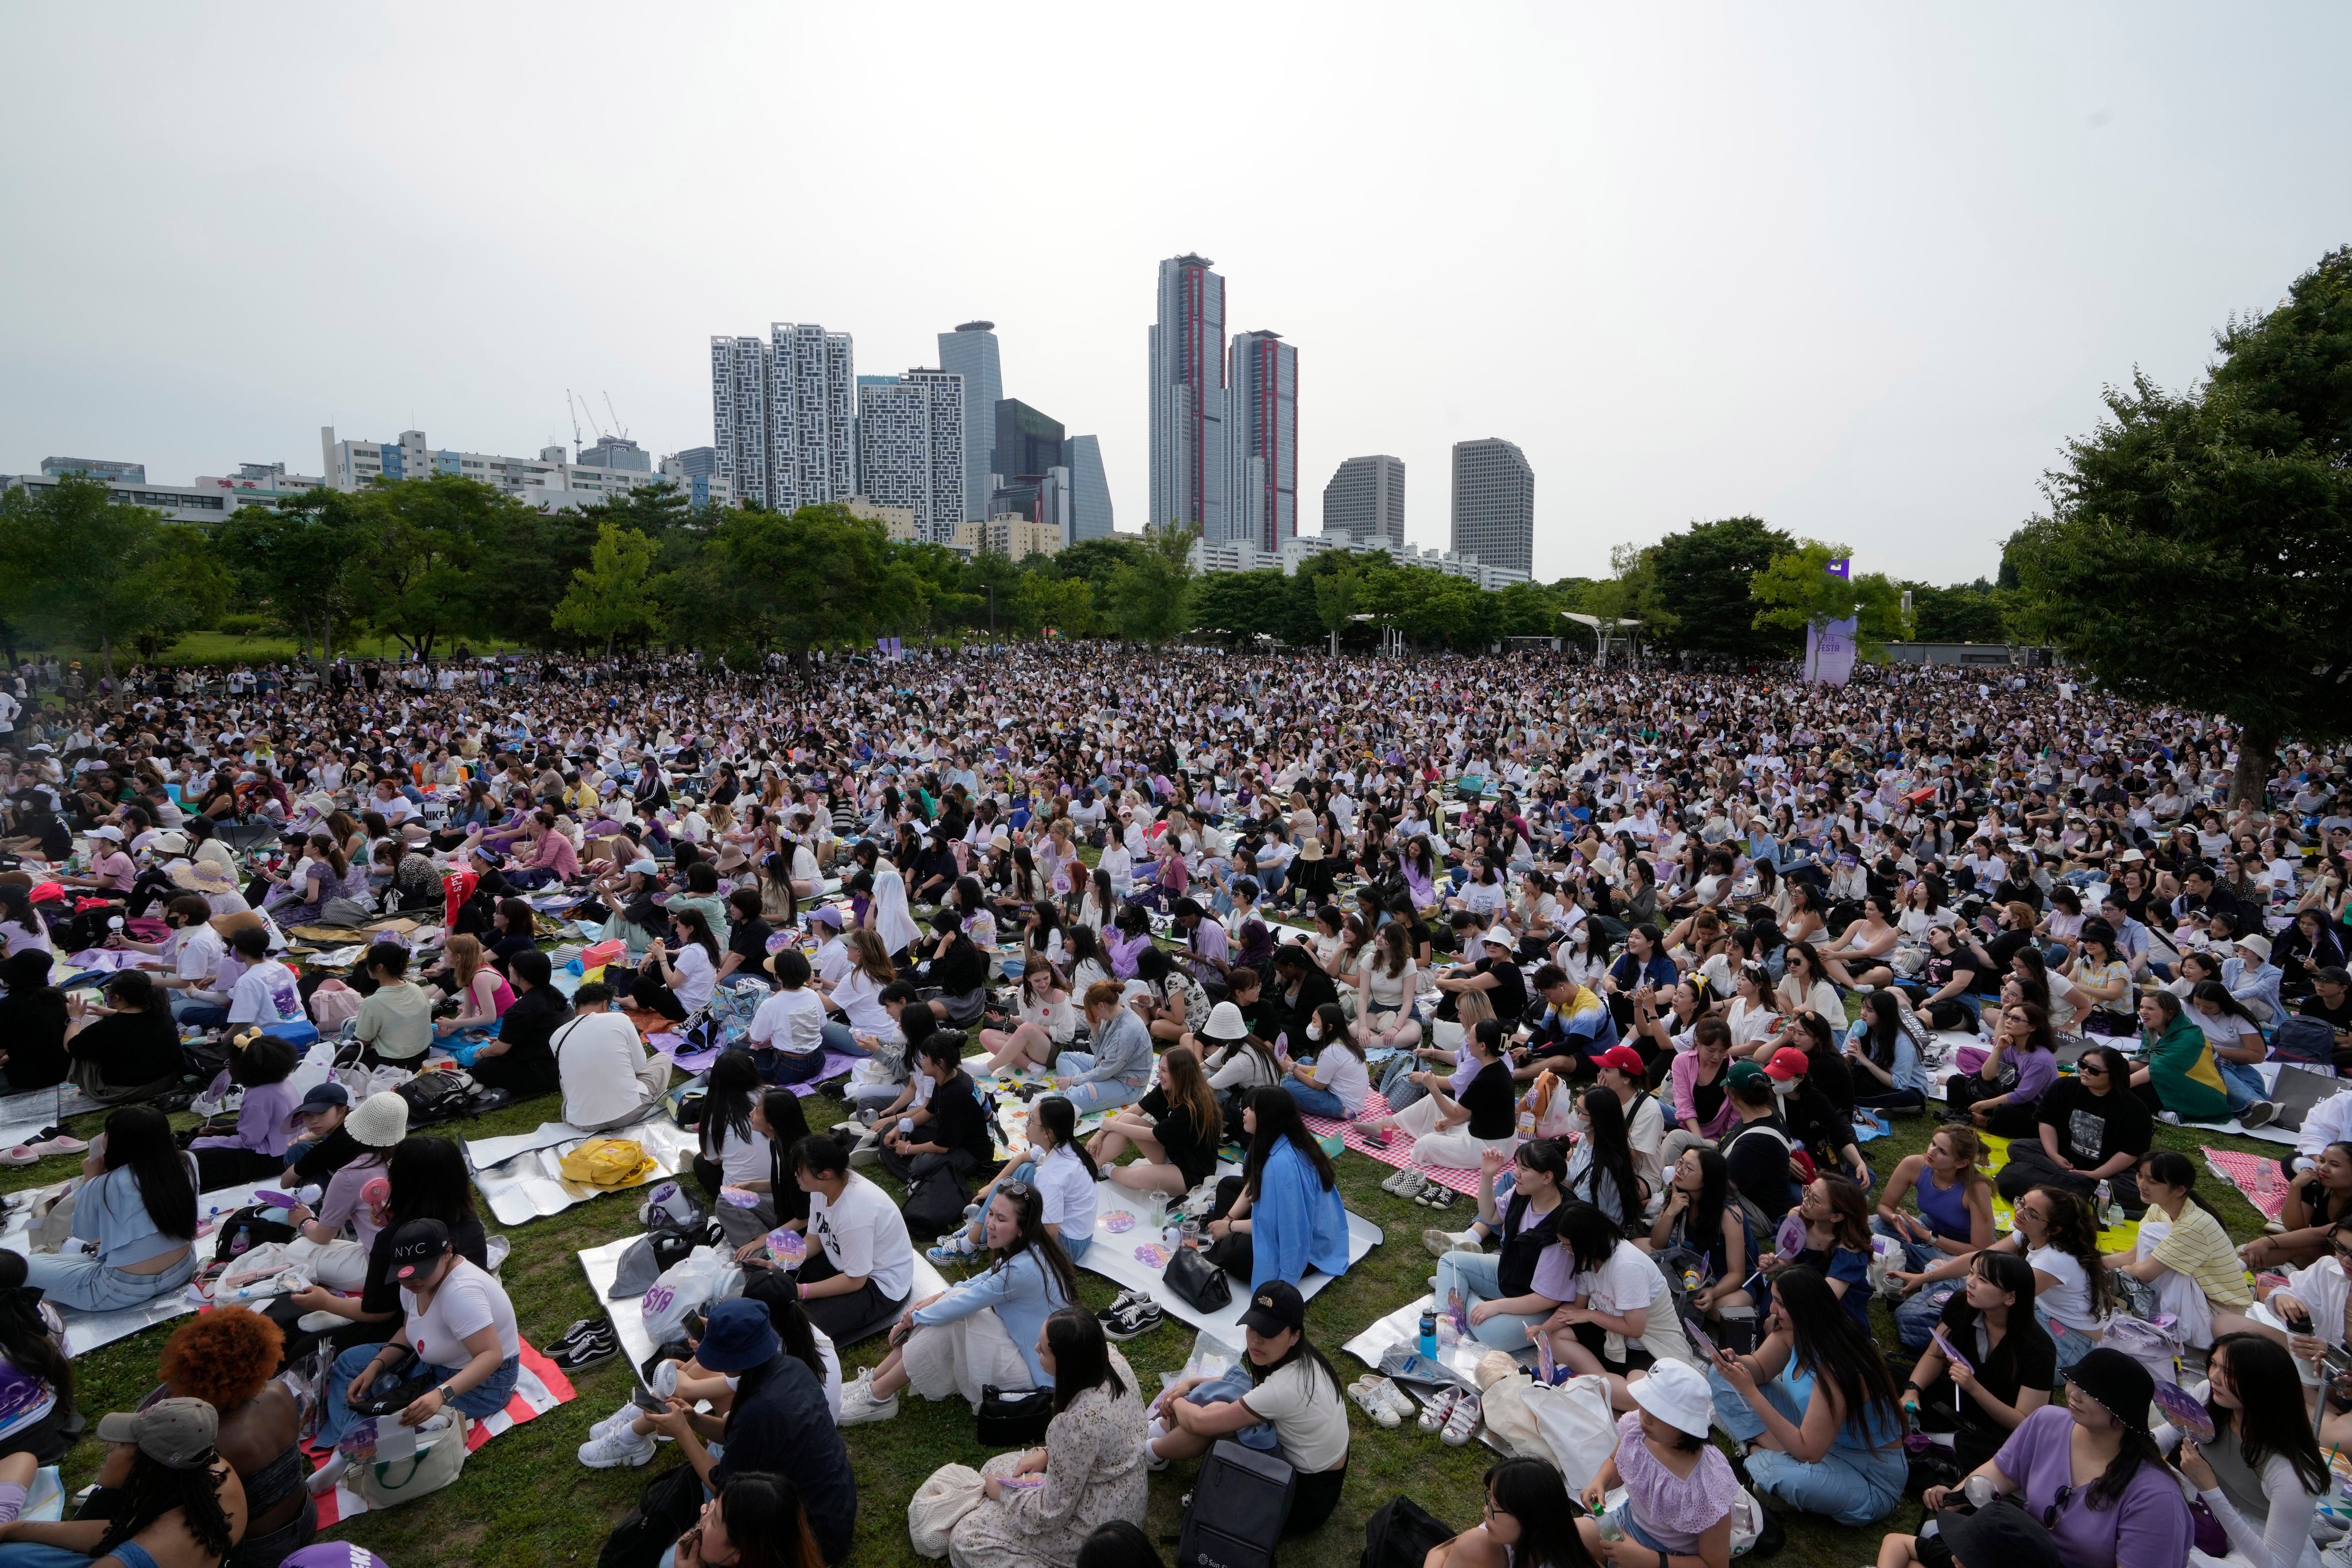 Fans of BTS gather at a park near the Han River in Seoul, South Korea, during an event to celebrate the 10th anniversary of the K-pop band. Photo: APS